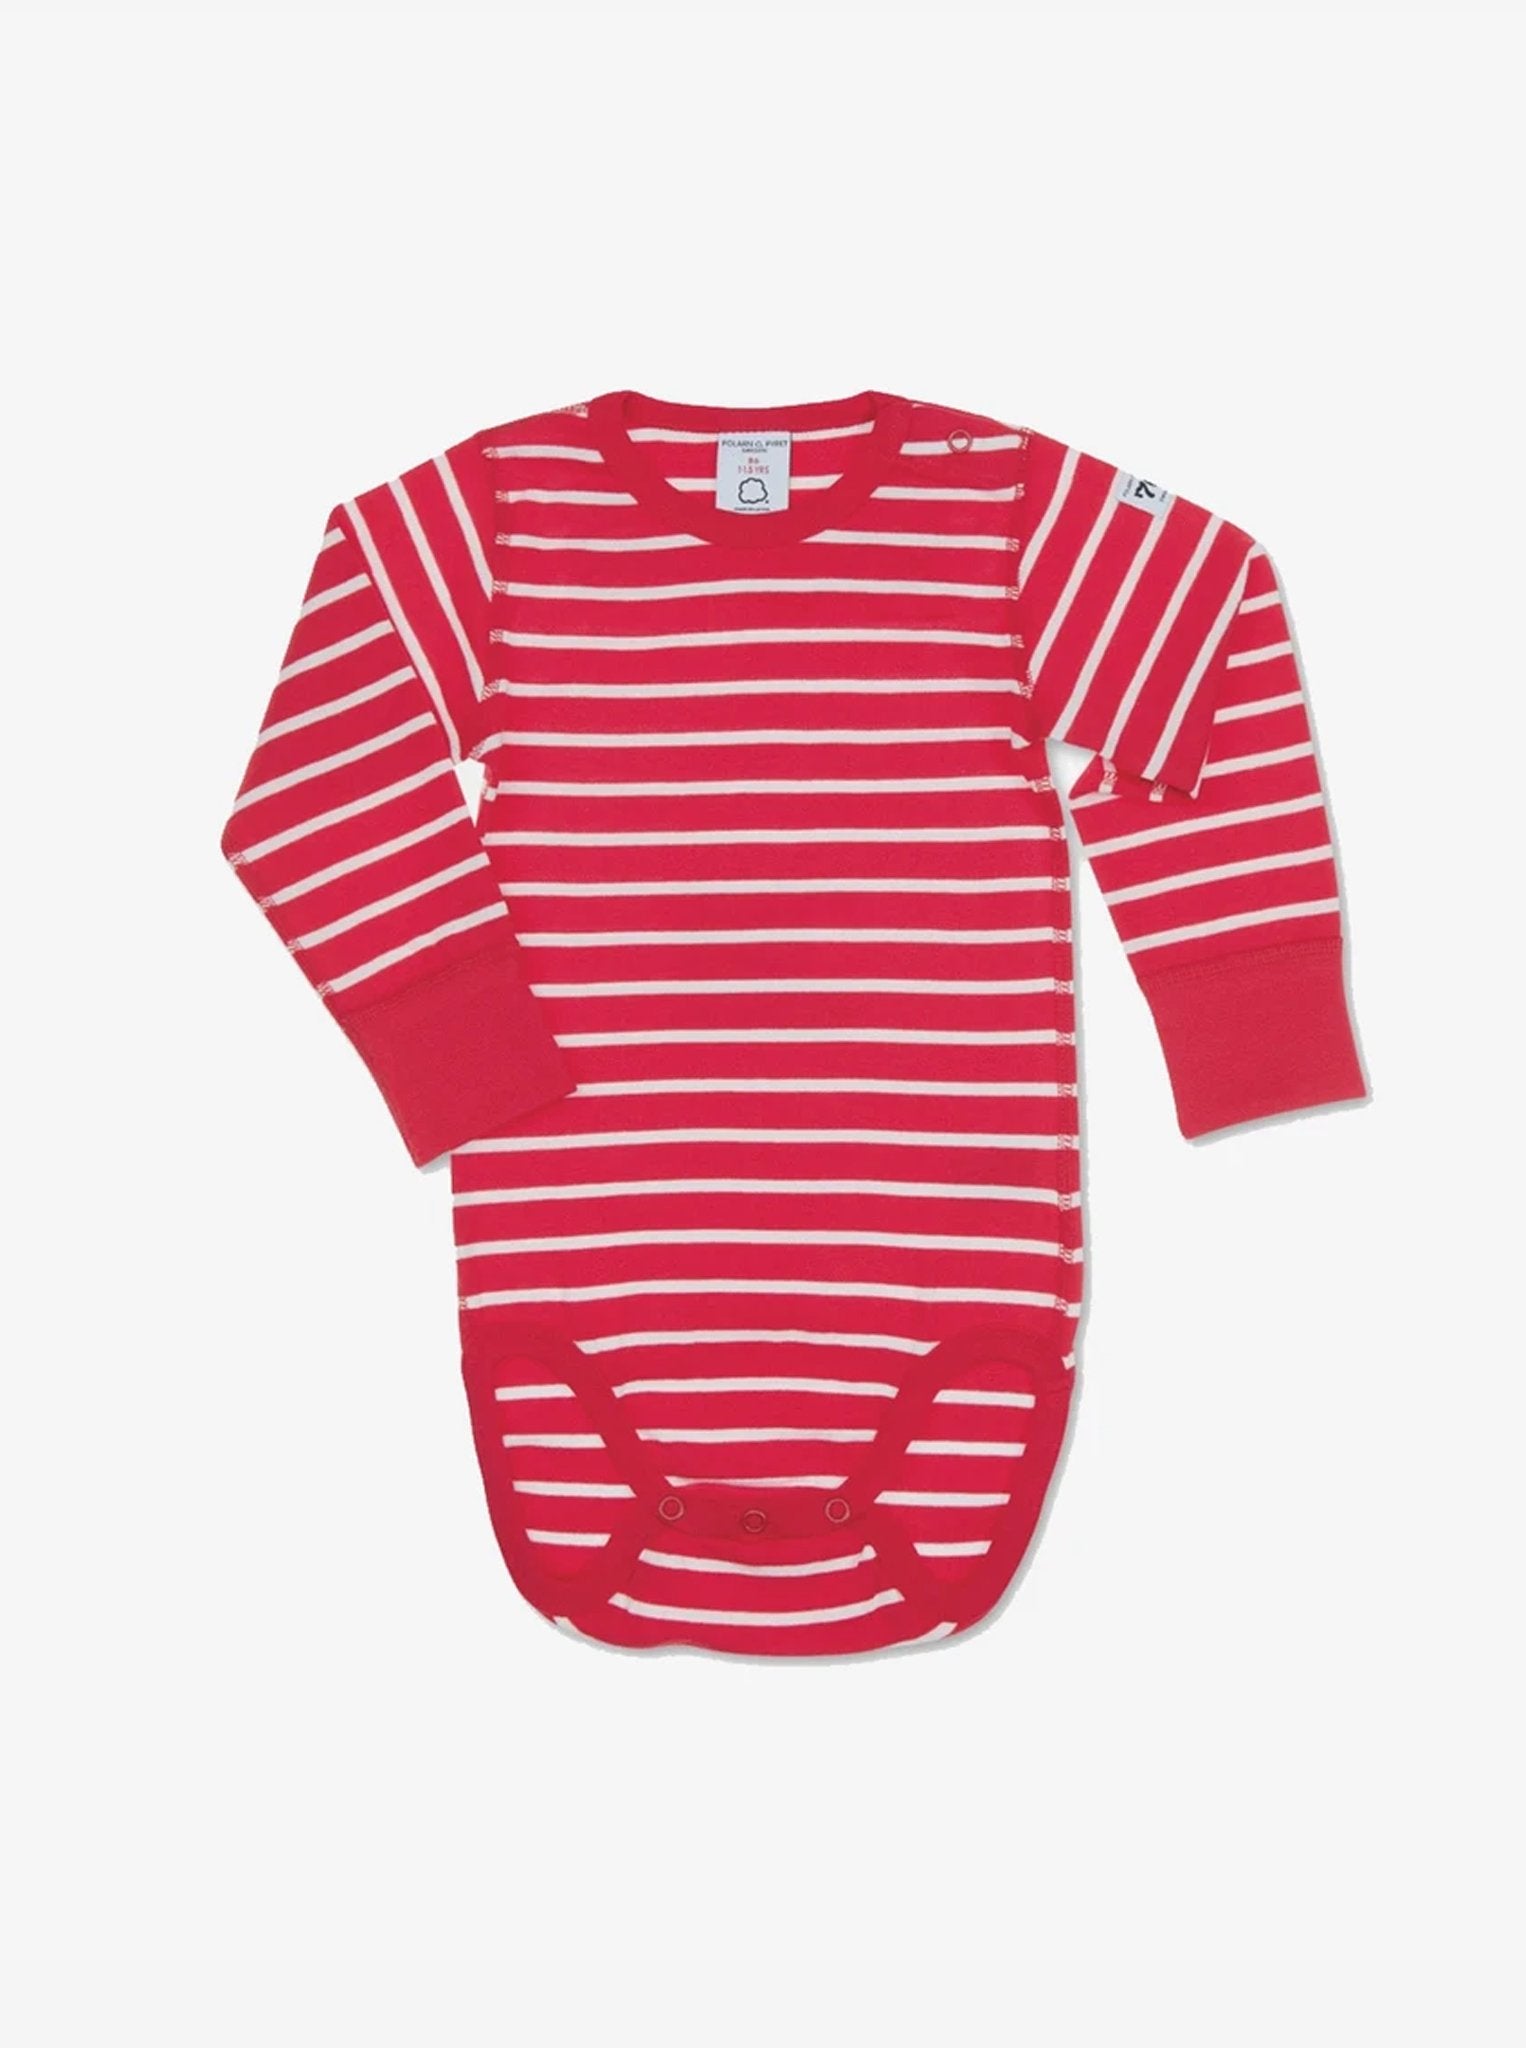 newborn babygrow red and white striped, ethical quality organic cotton, polarn o. pyret classic